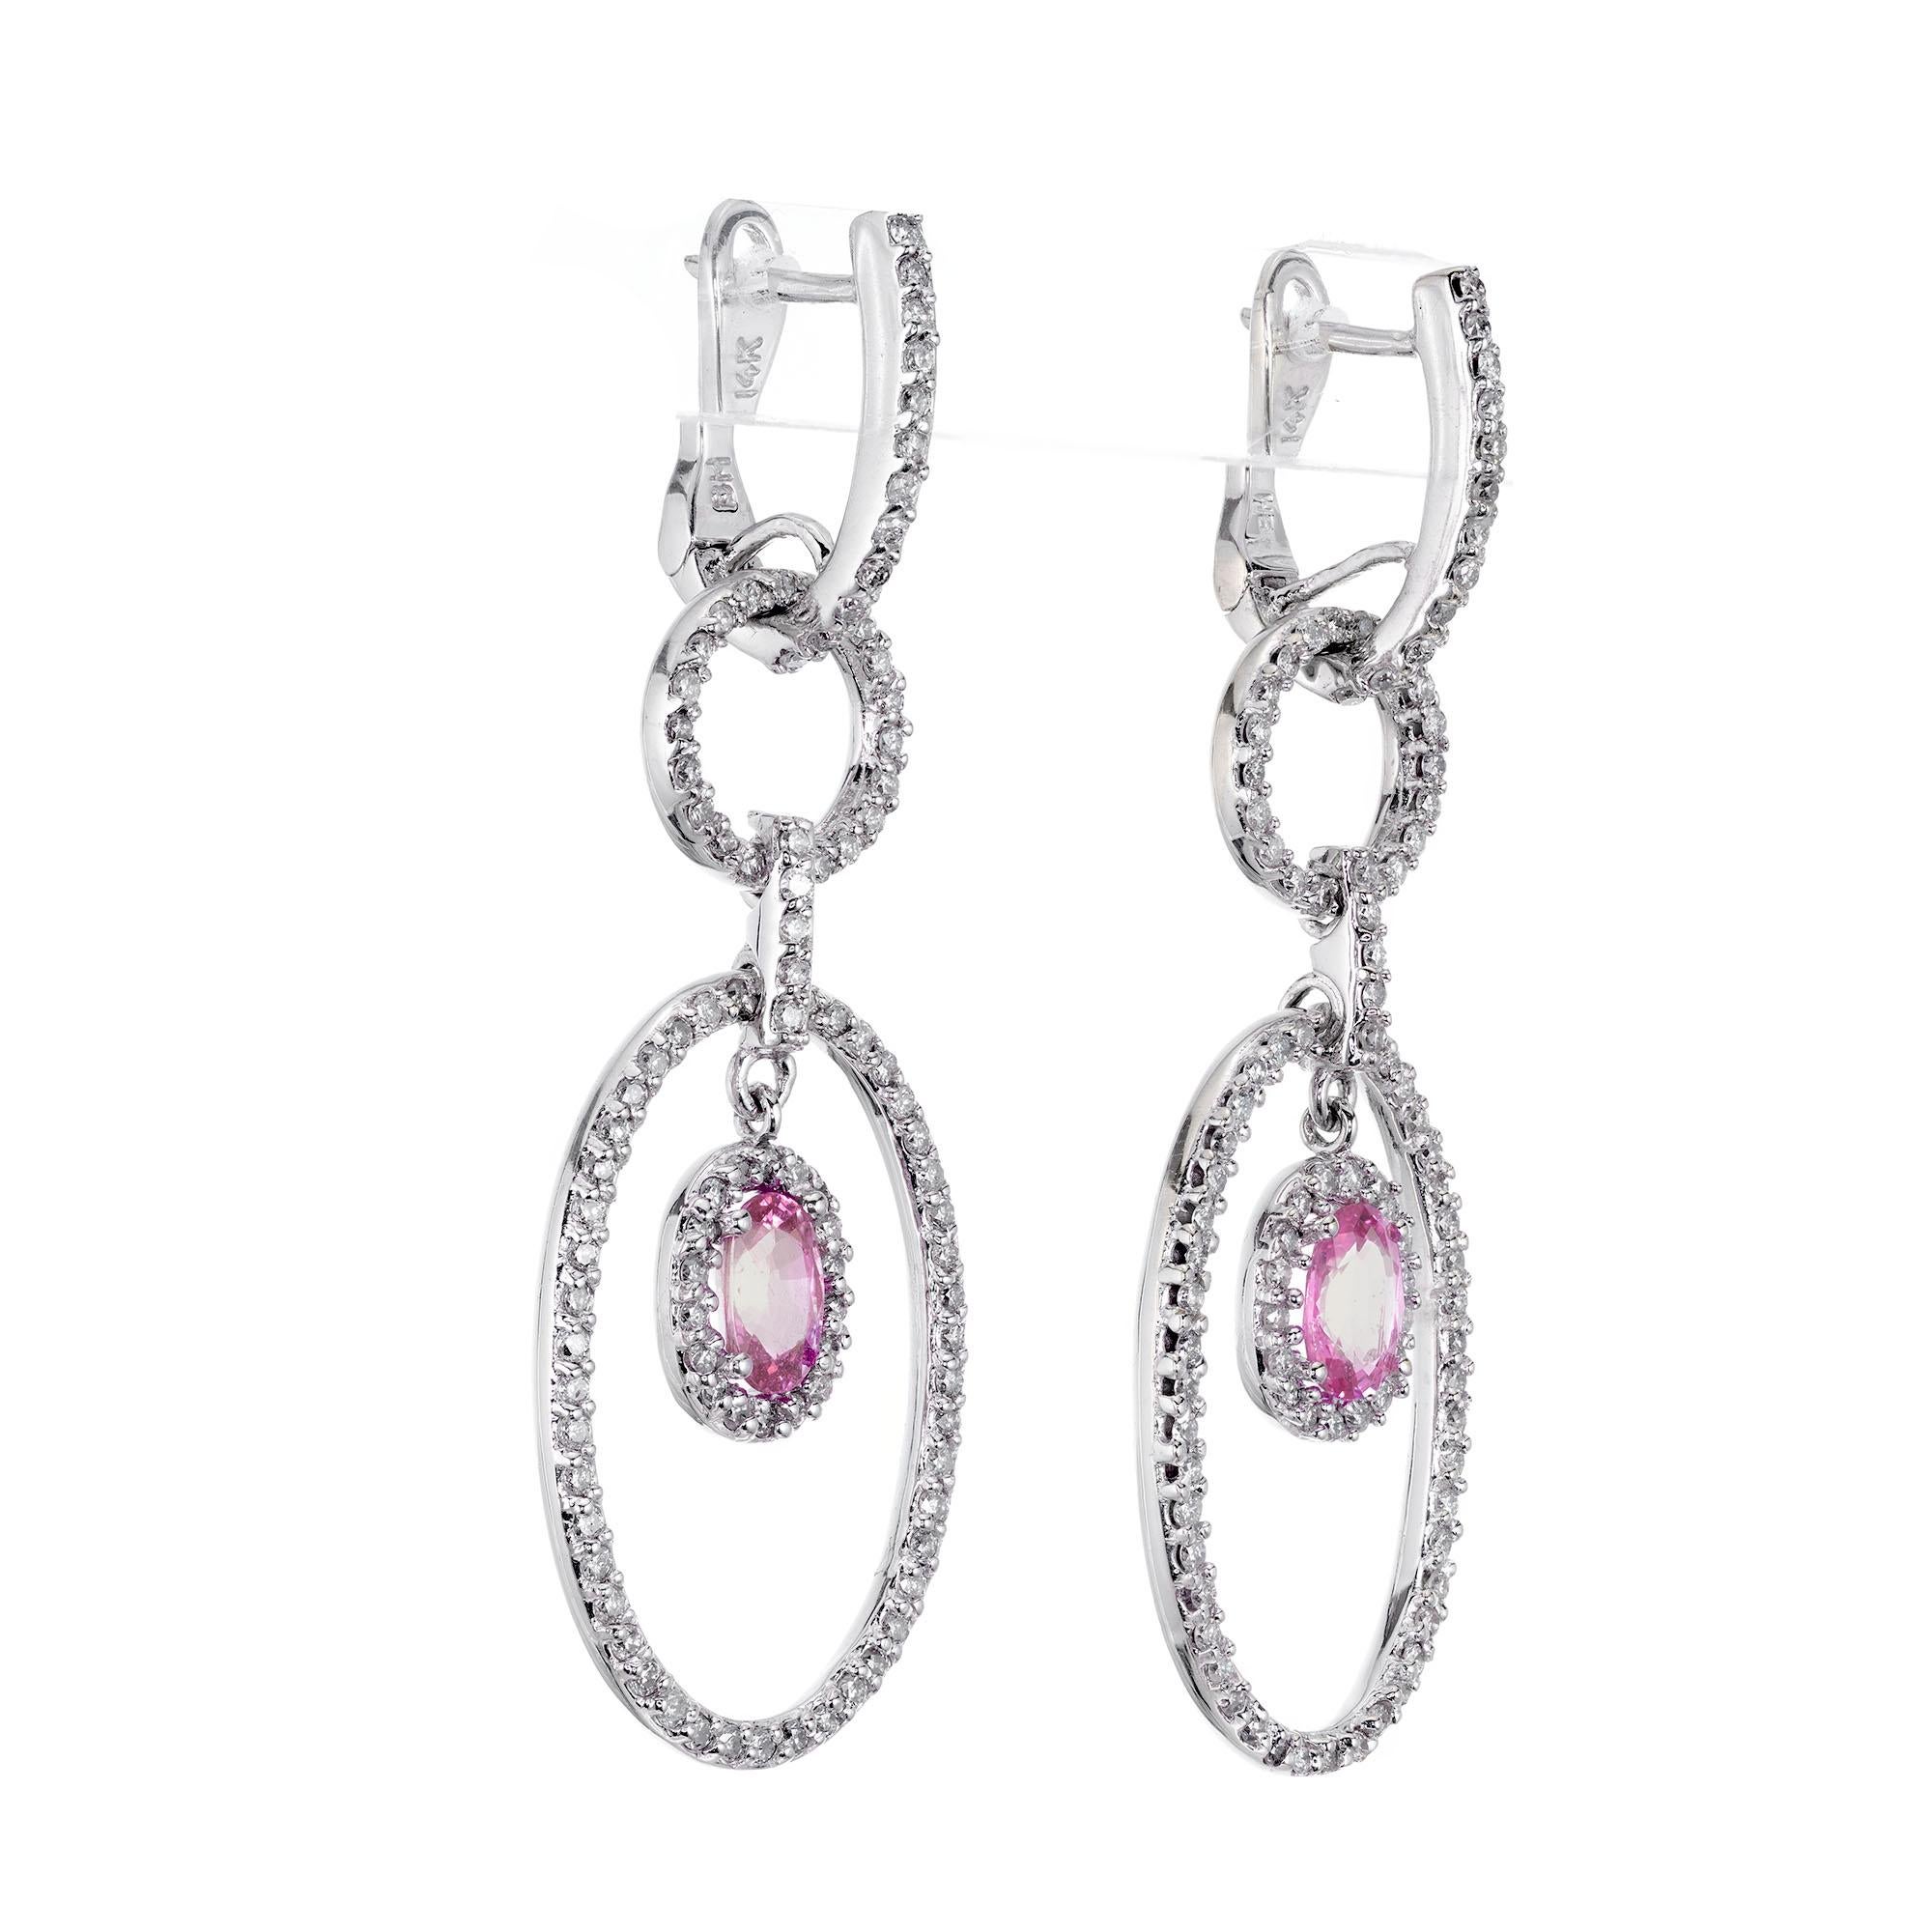 Pink oval sapphire and diamond five section 14k white gold dangle earrings. The center sections is set with oval medium pastel pink Sapphires with 172 round accent diamonds. 

172 round diamonds full cut G-H, SI1 approx. total weight 1.00cts
2 oval